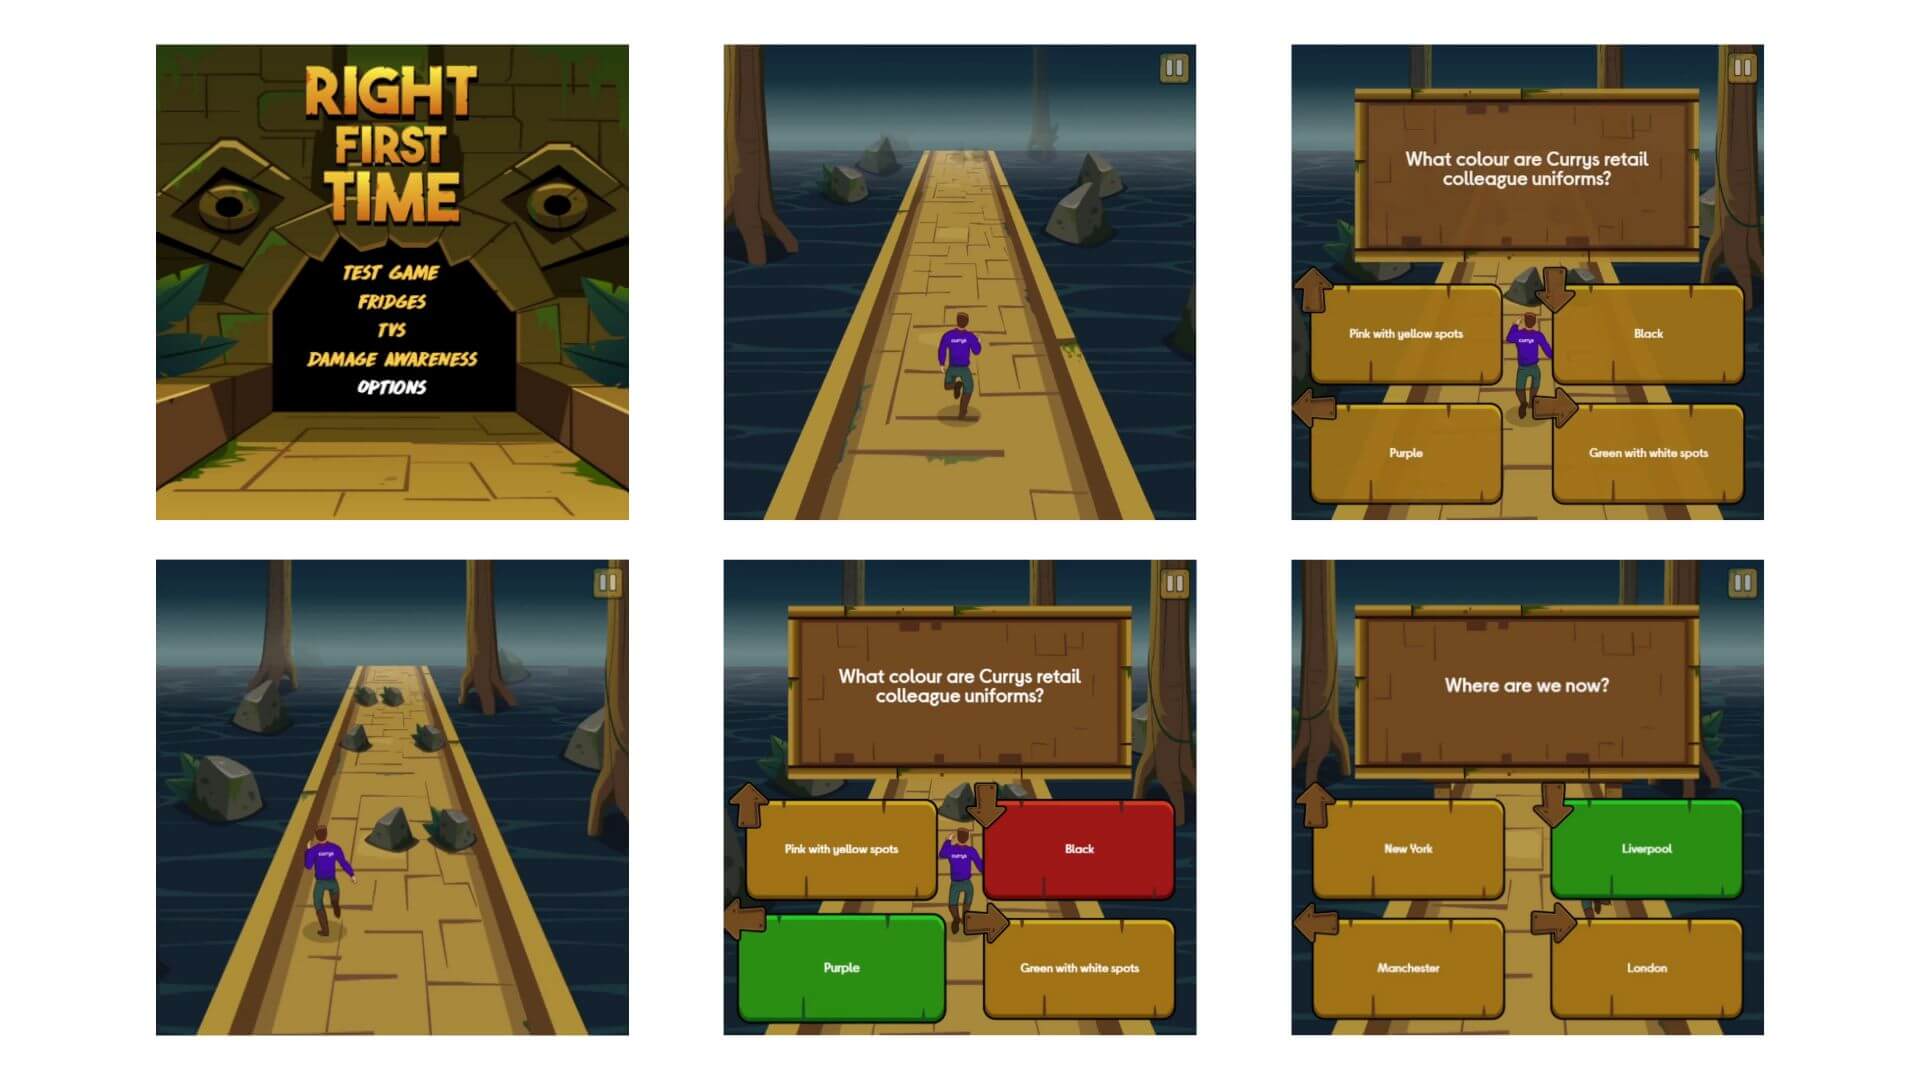 HTML5 Games To Boost Sales Team Camaraderie